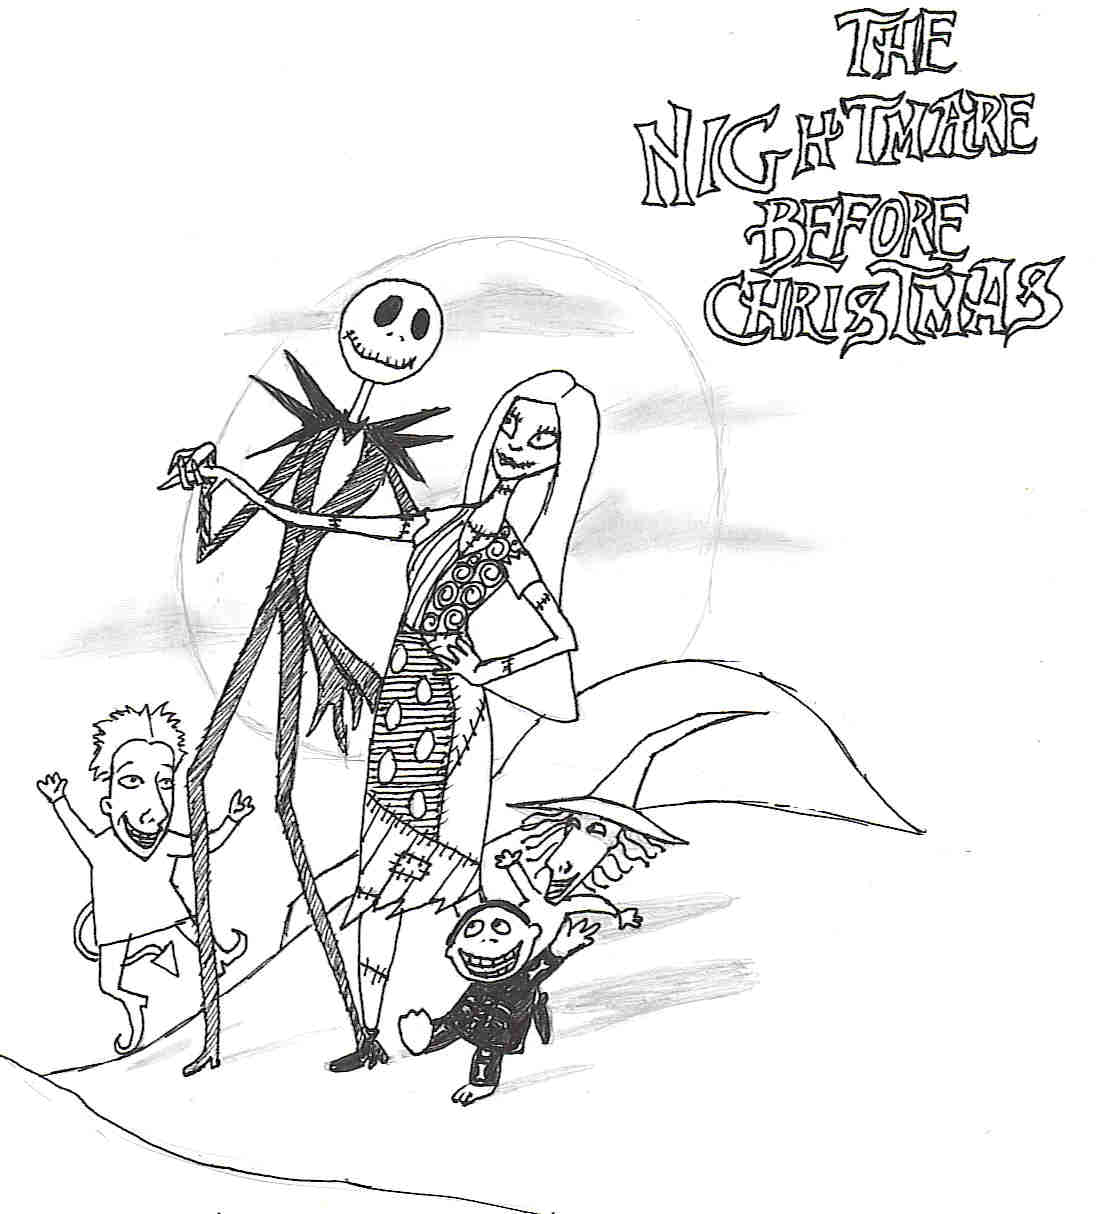 The nightmare before christmas hill by Vampire_Countess